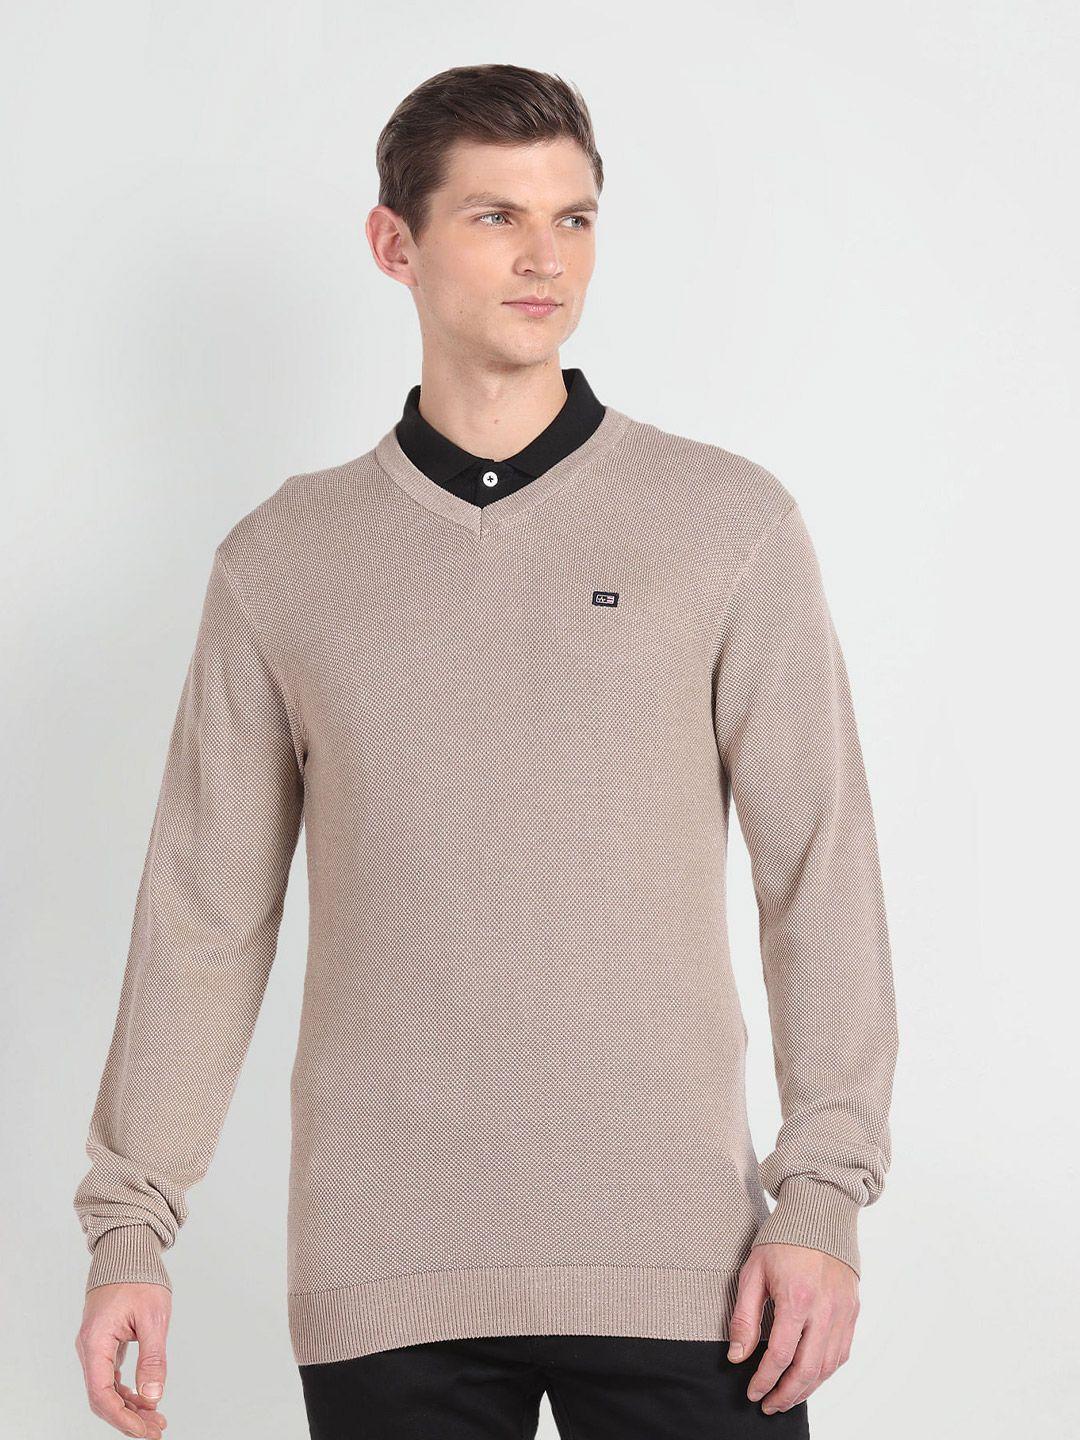 arrow-sport-ribbed-v-neck-long-sleeves-pullover-sweater